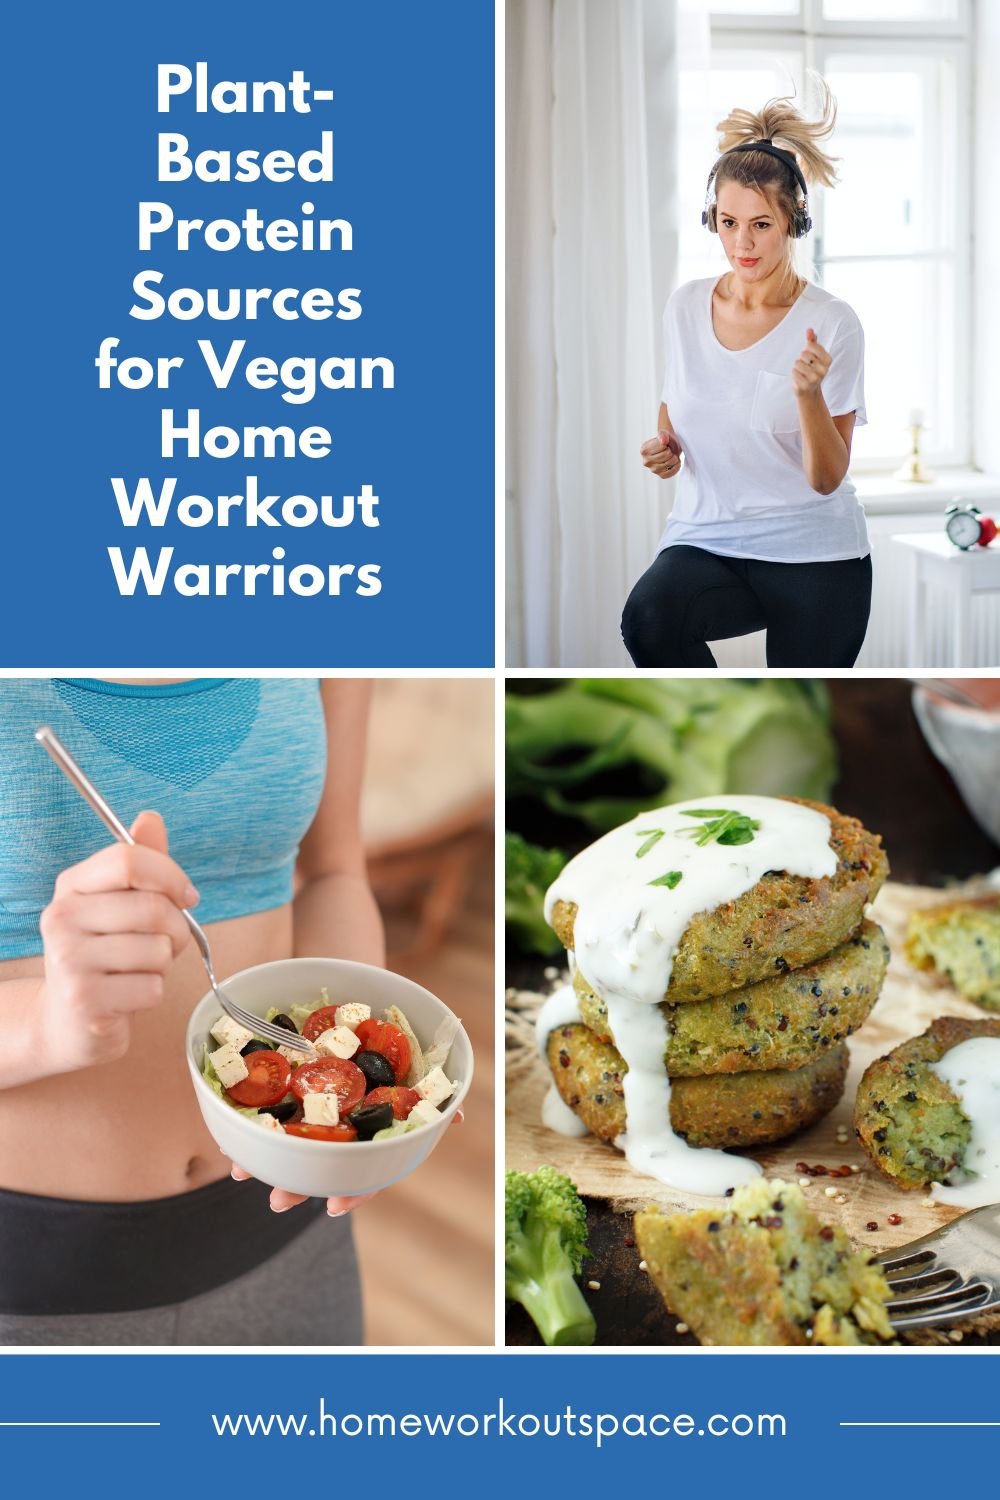 78. Plant-Based Protein Sources for Vegan Home Workout Warriors